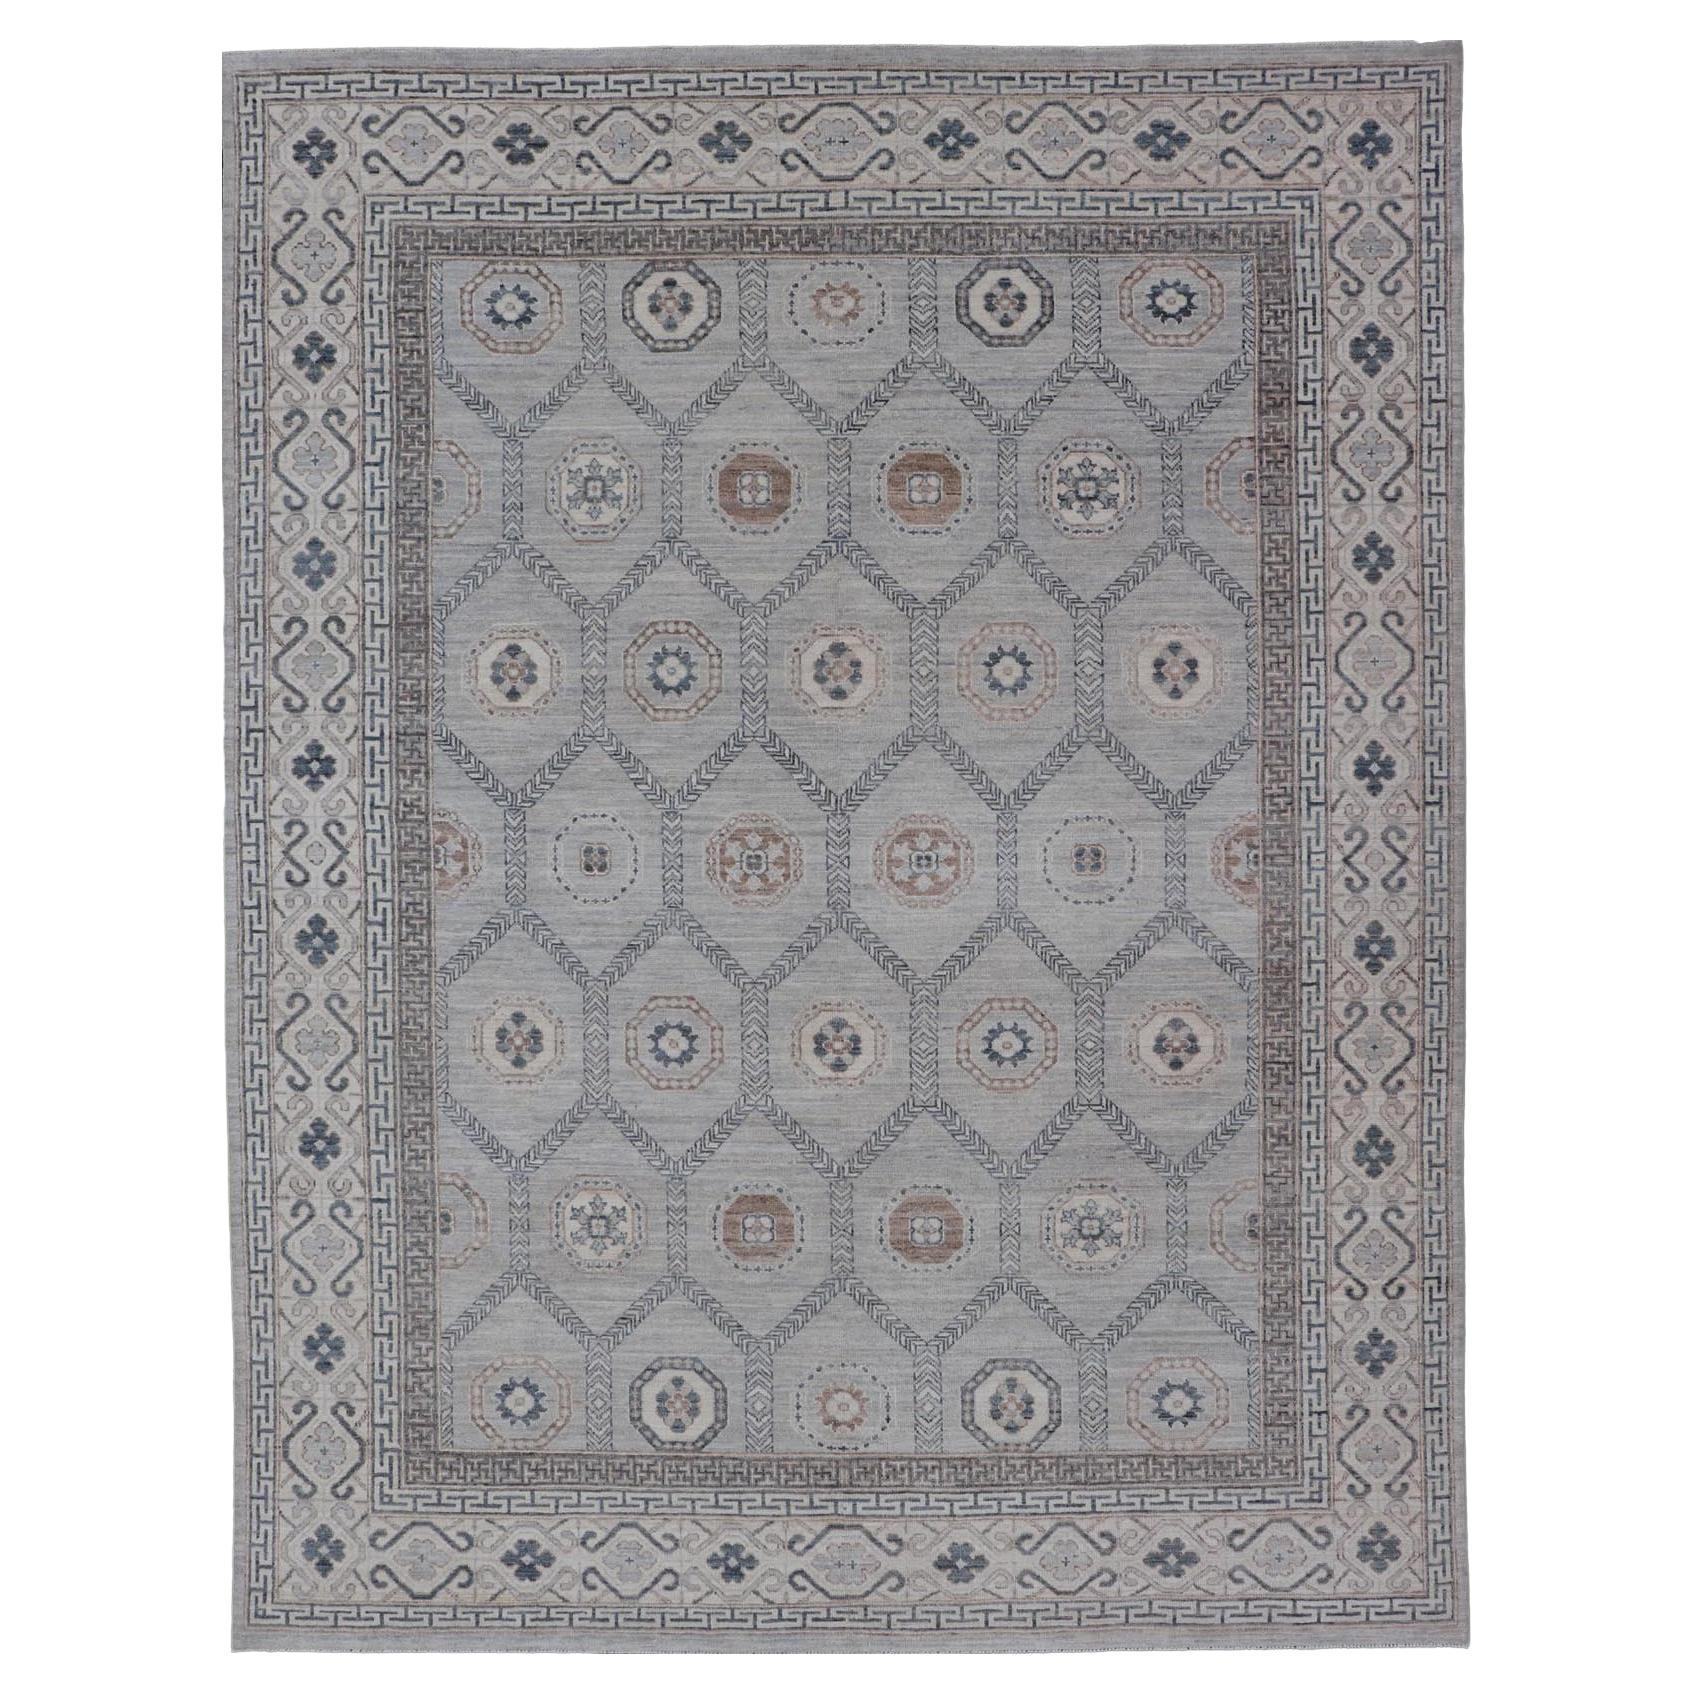 Afghan Sub-Geometric Mosaic Khotan Rug with Muted Tones of Blue and Brown